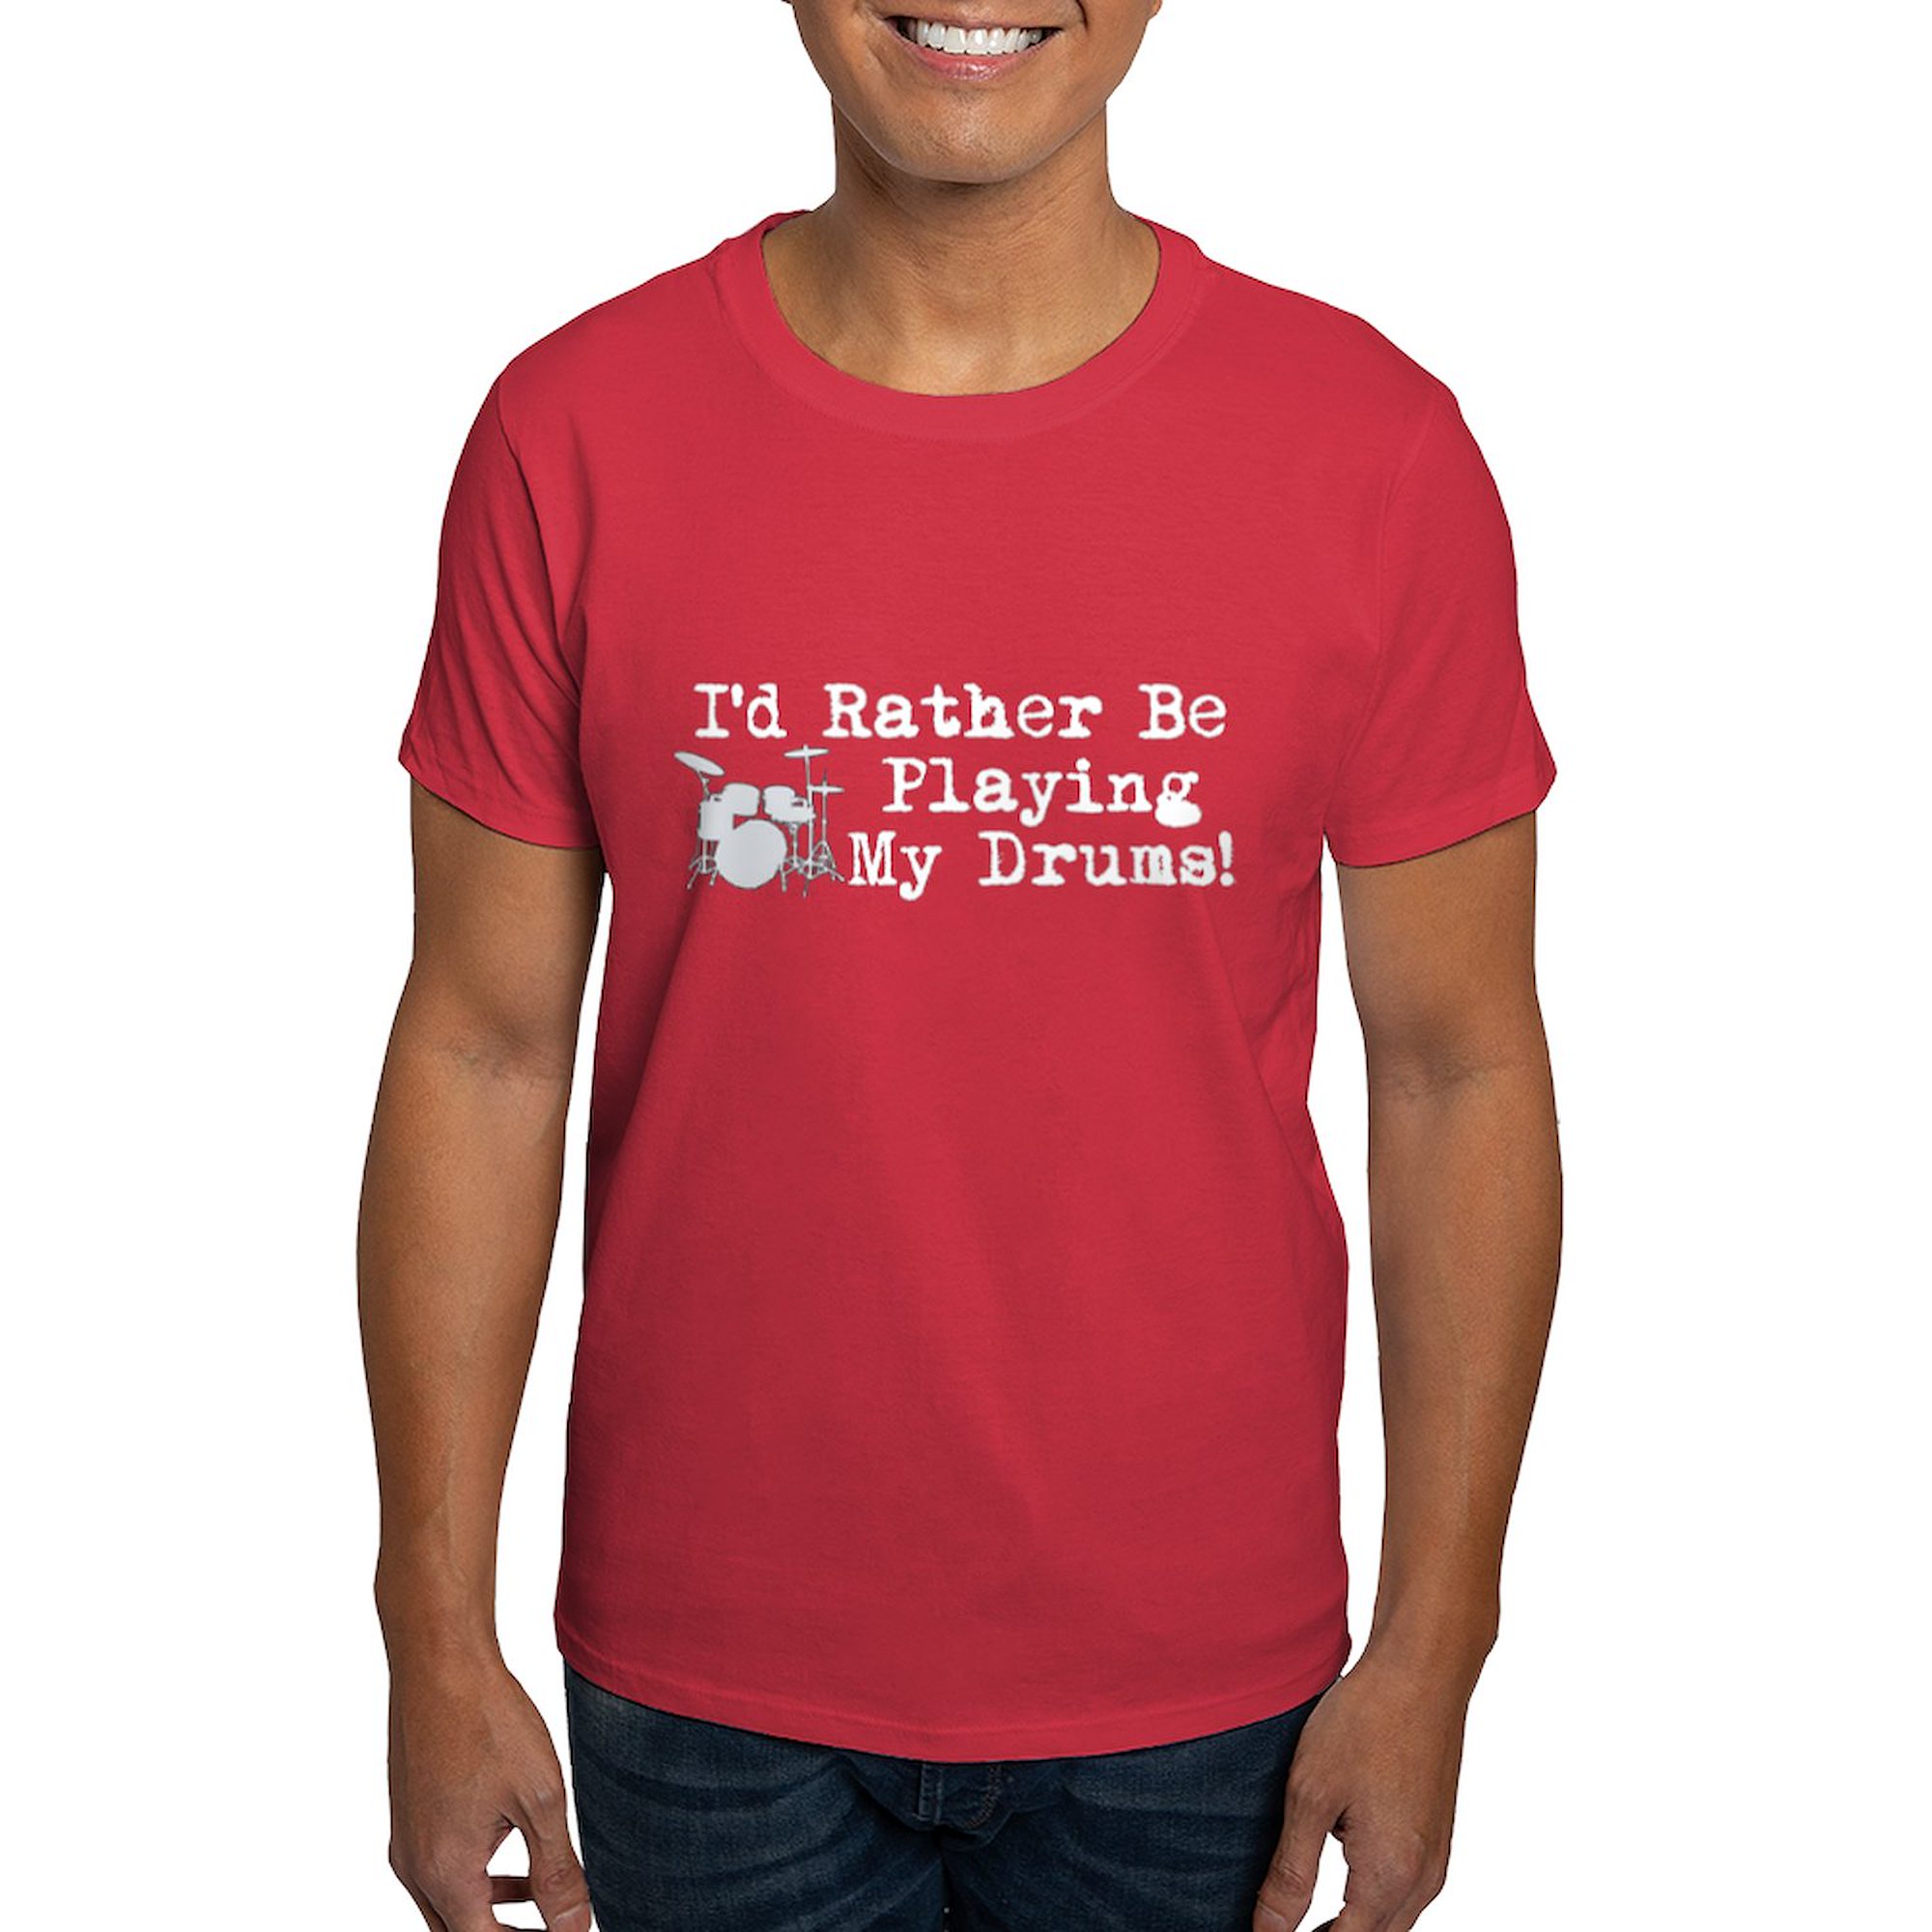 CafePress - Id Rather Be Playing My Drums T Shirt - 100% Cotton T-Shirt - image 1 of 4